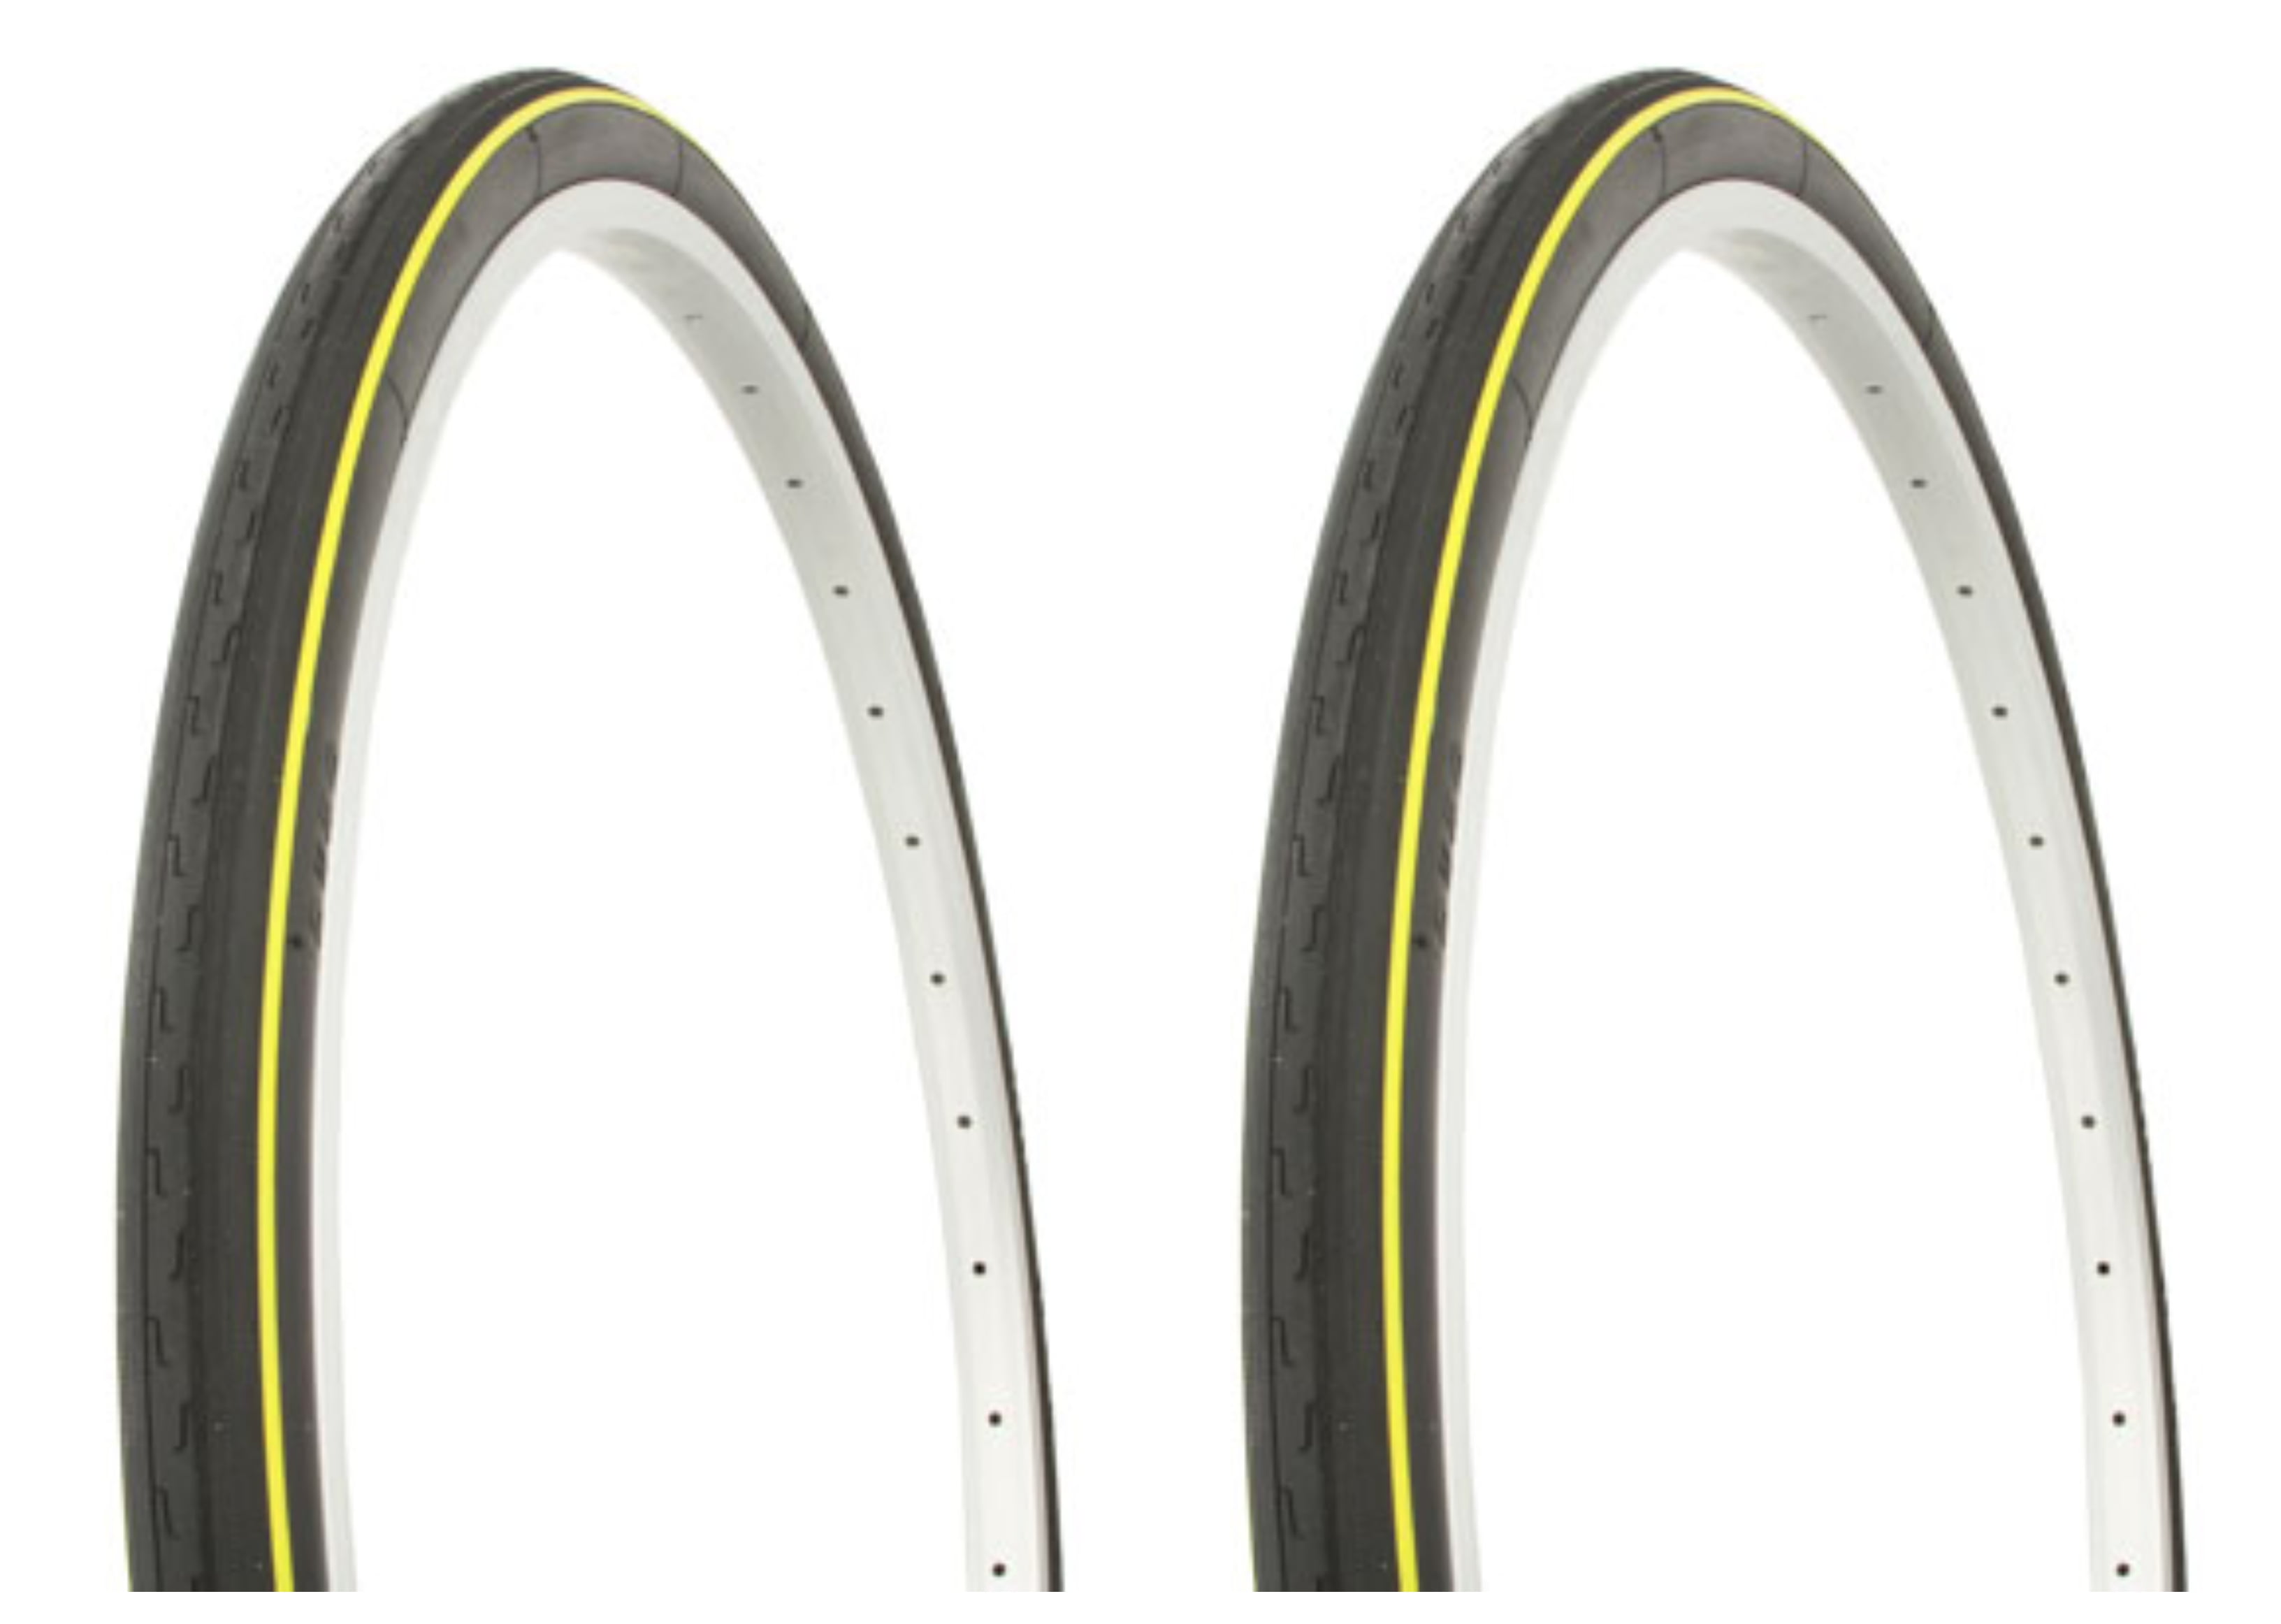 NEW DURO TIRE IN TIRE 26 X 1 3/8 BLACK/YELLOW SIDE LINE HF-156A. 